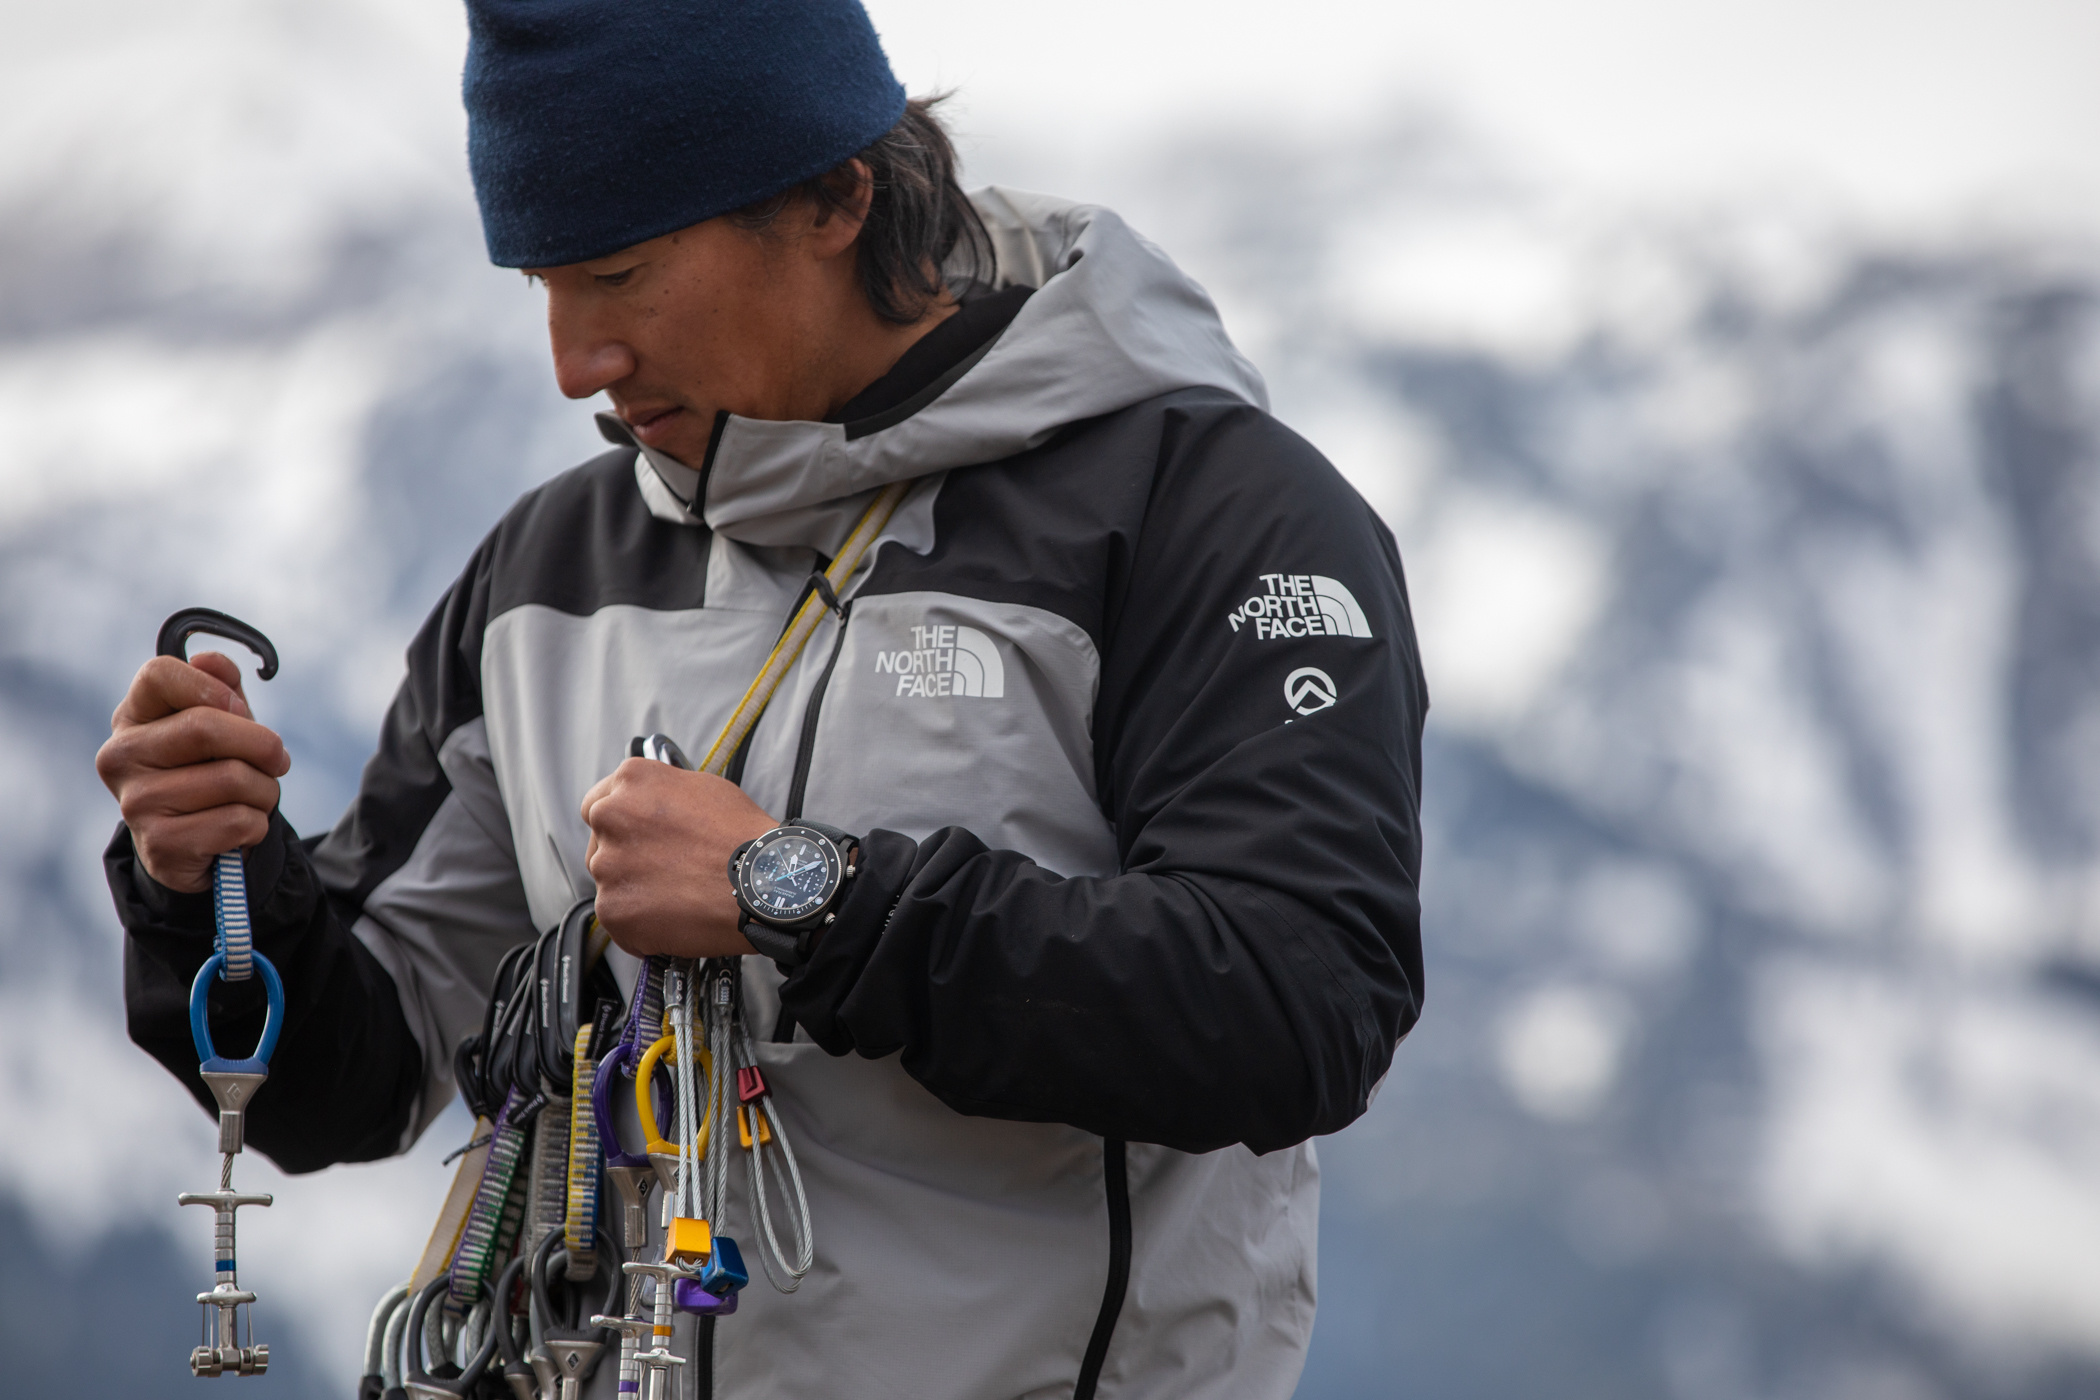 Panerai Celebrates Jimmy Chin With Two Watch Releases And Exclusive U.S. Experience